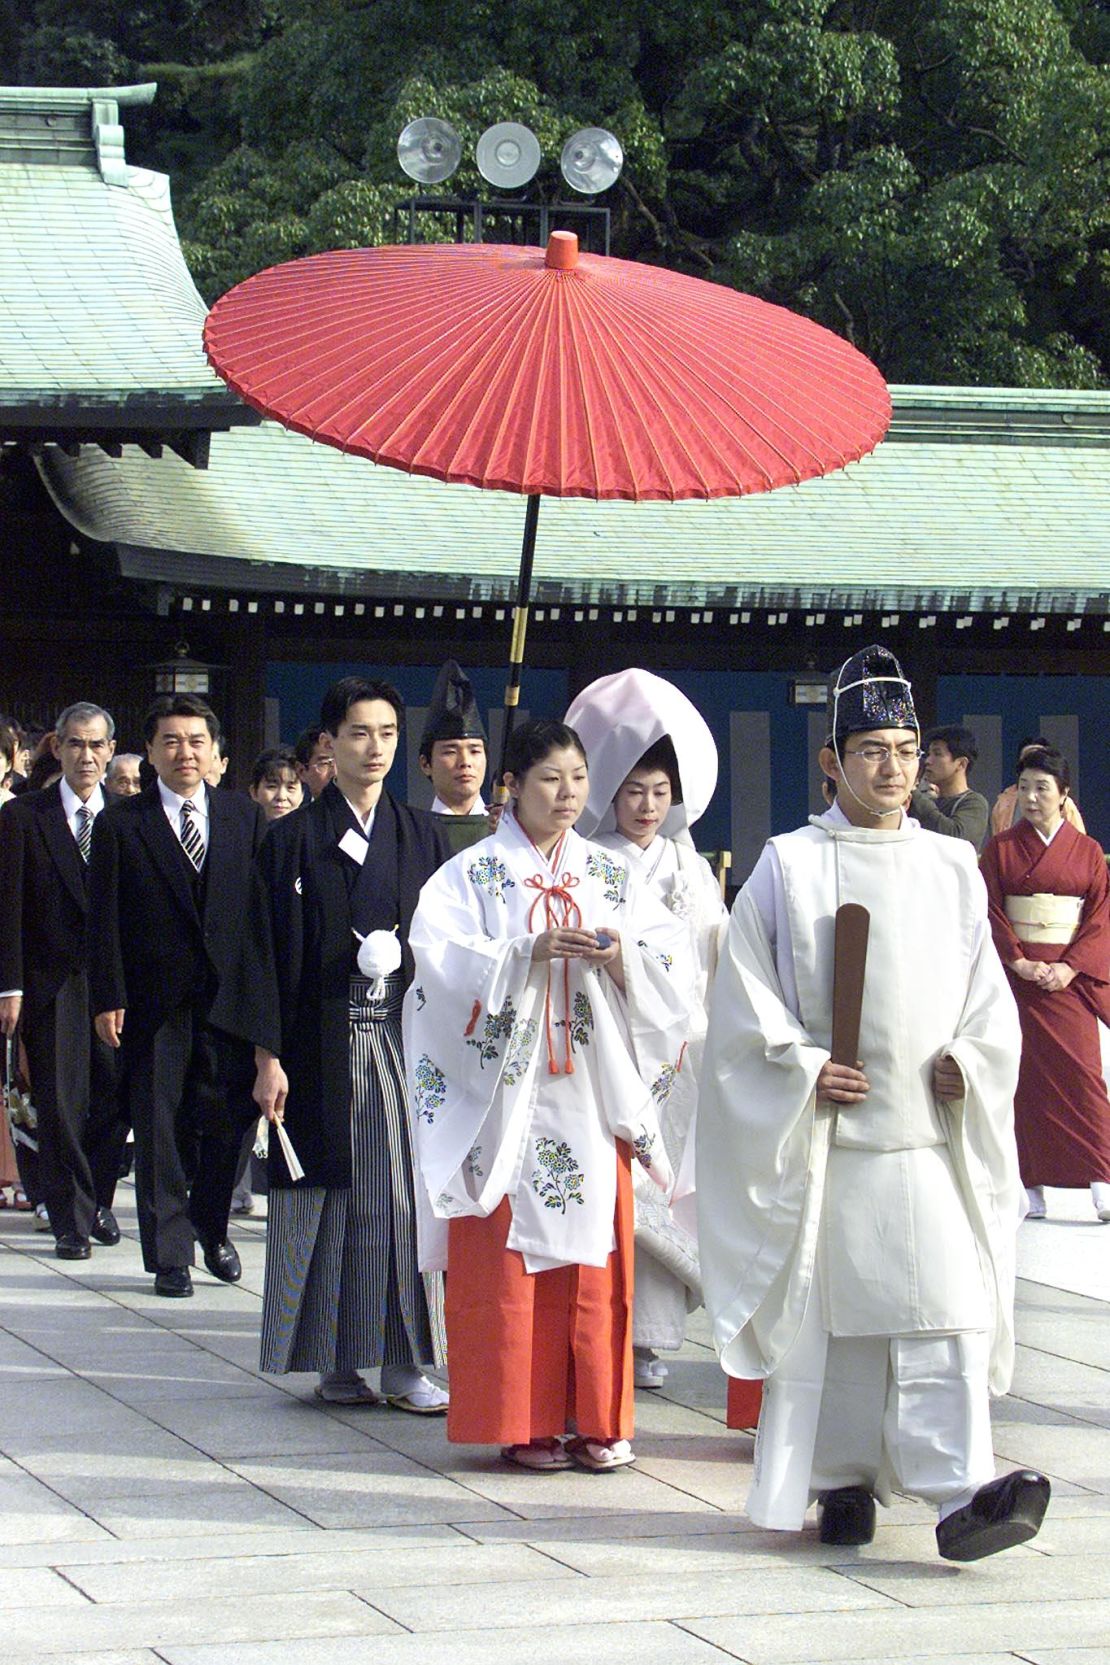 A Shinto priest leads the way of a Shinto wedding at the Meiji shrine. 